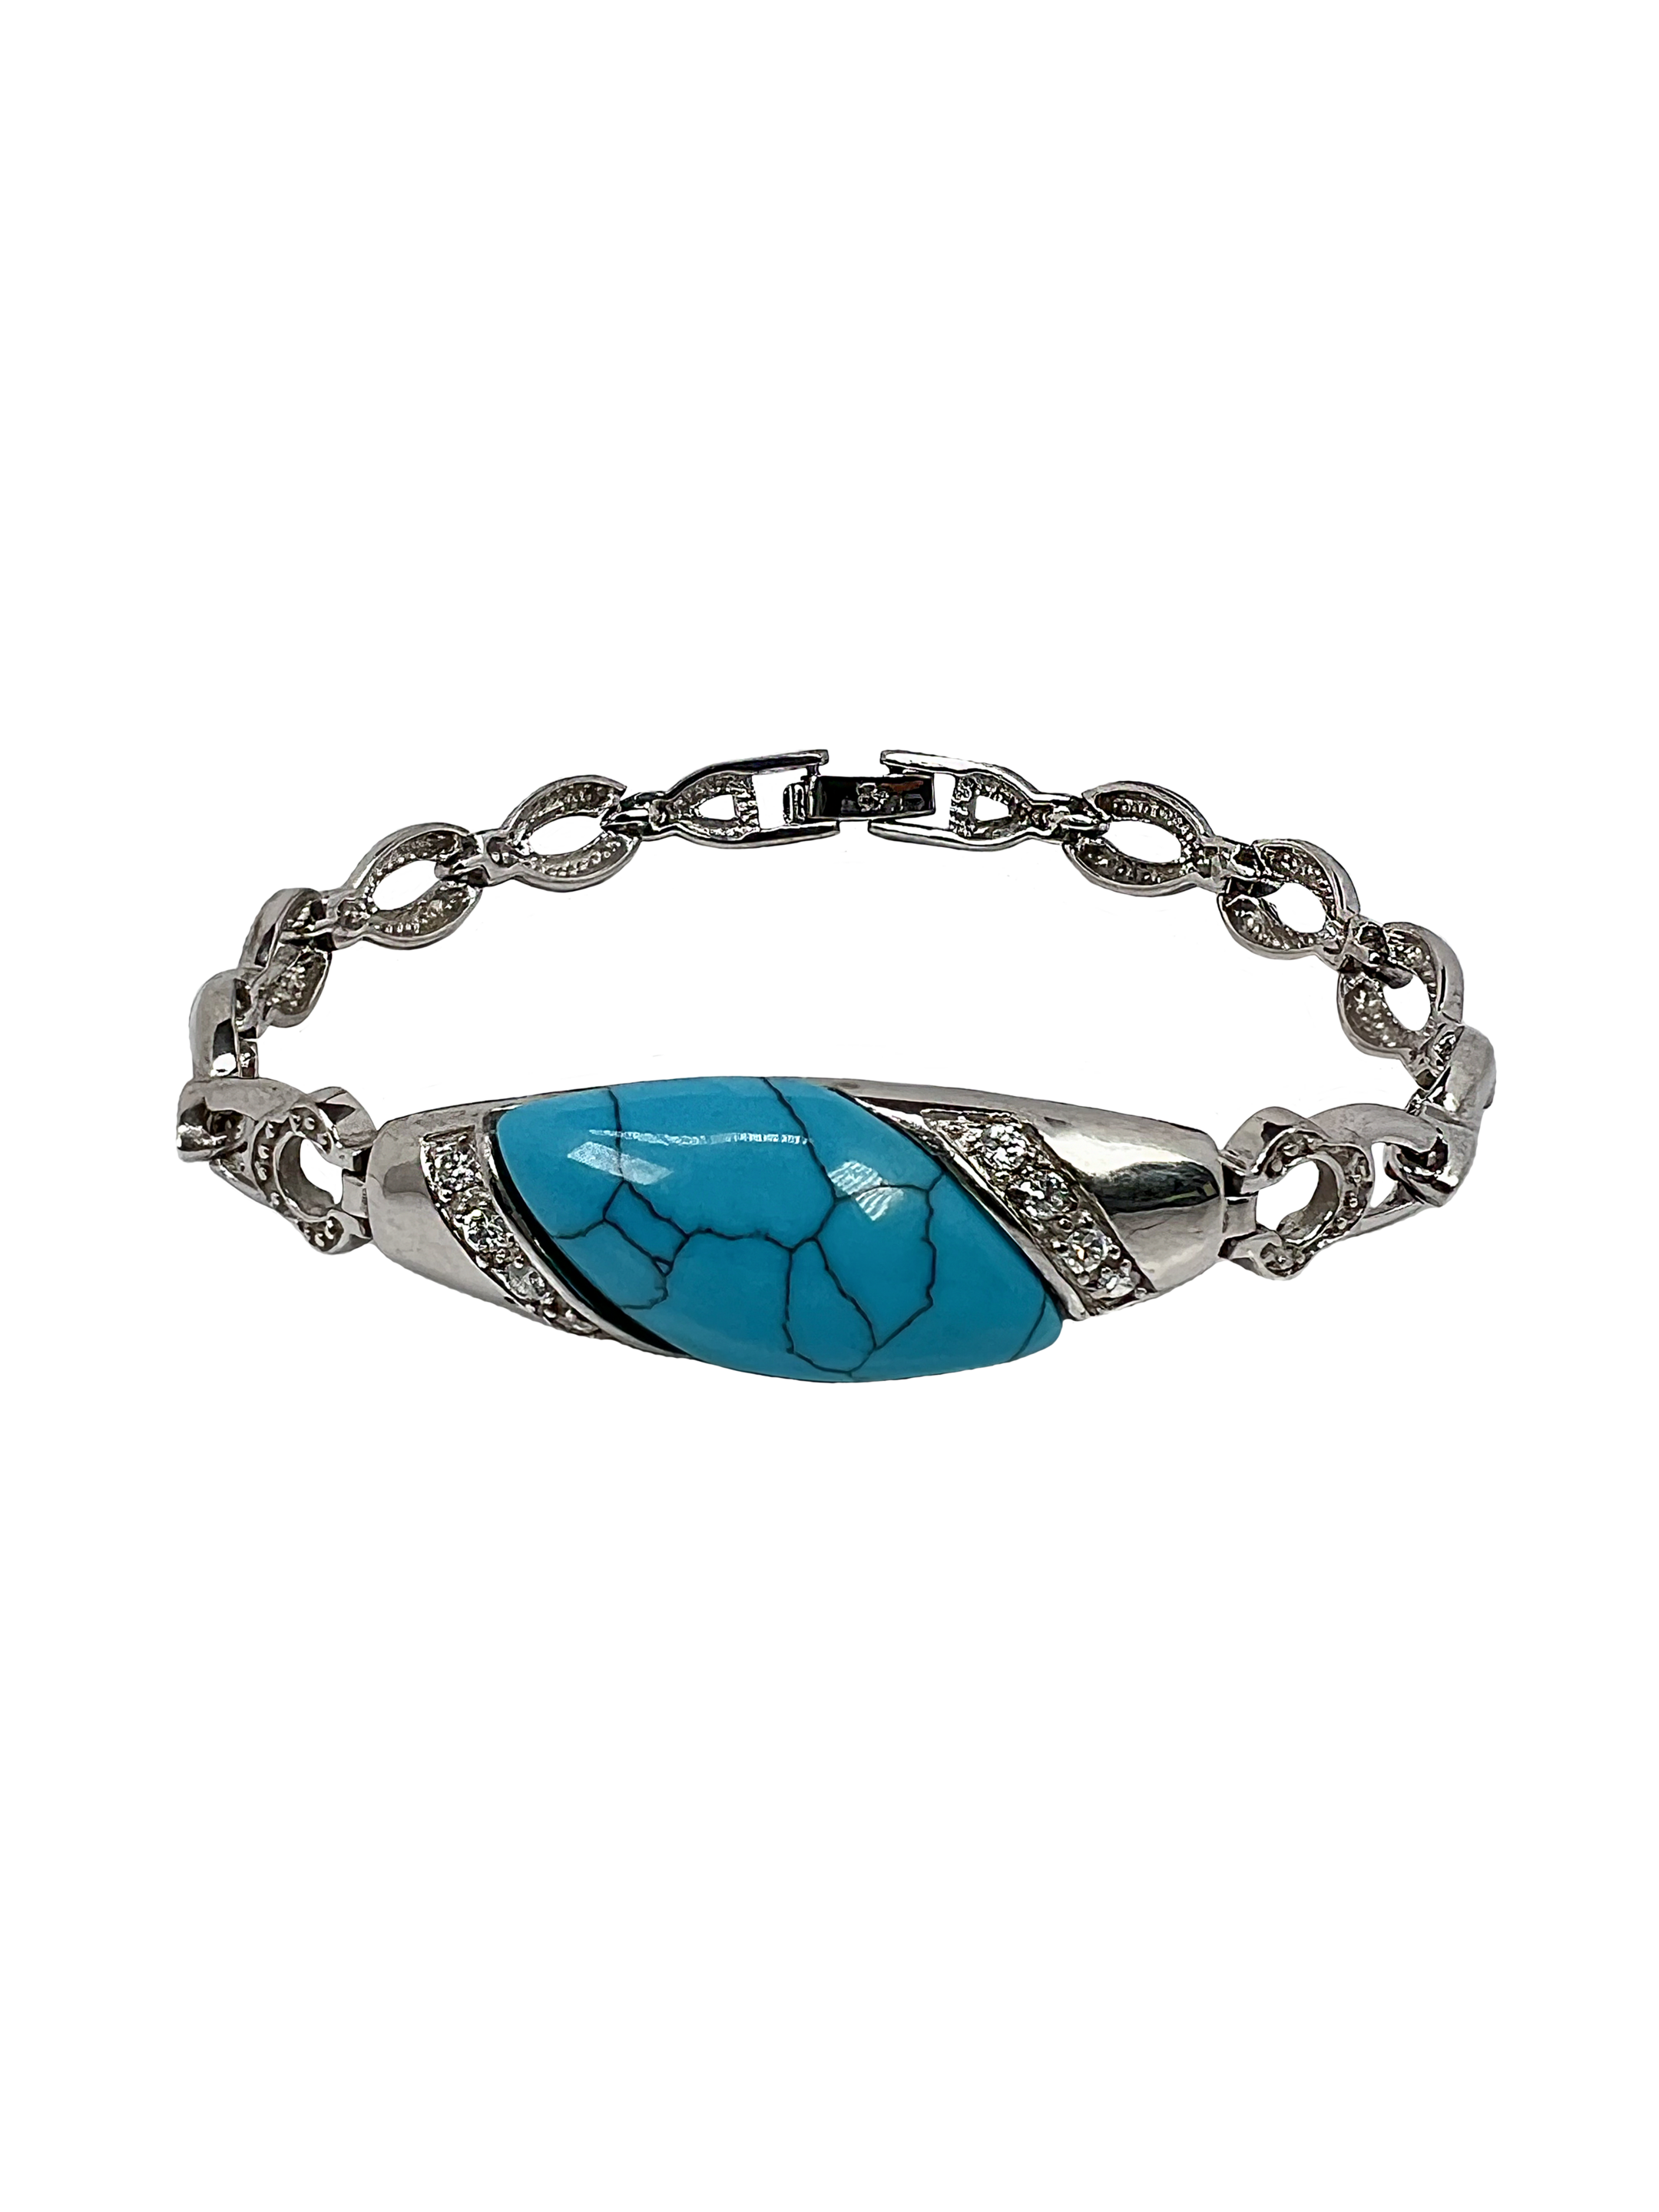 Silver bracelet with blue stone and clear crystals